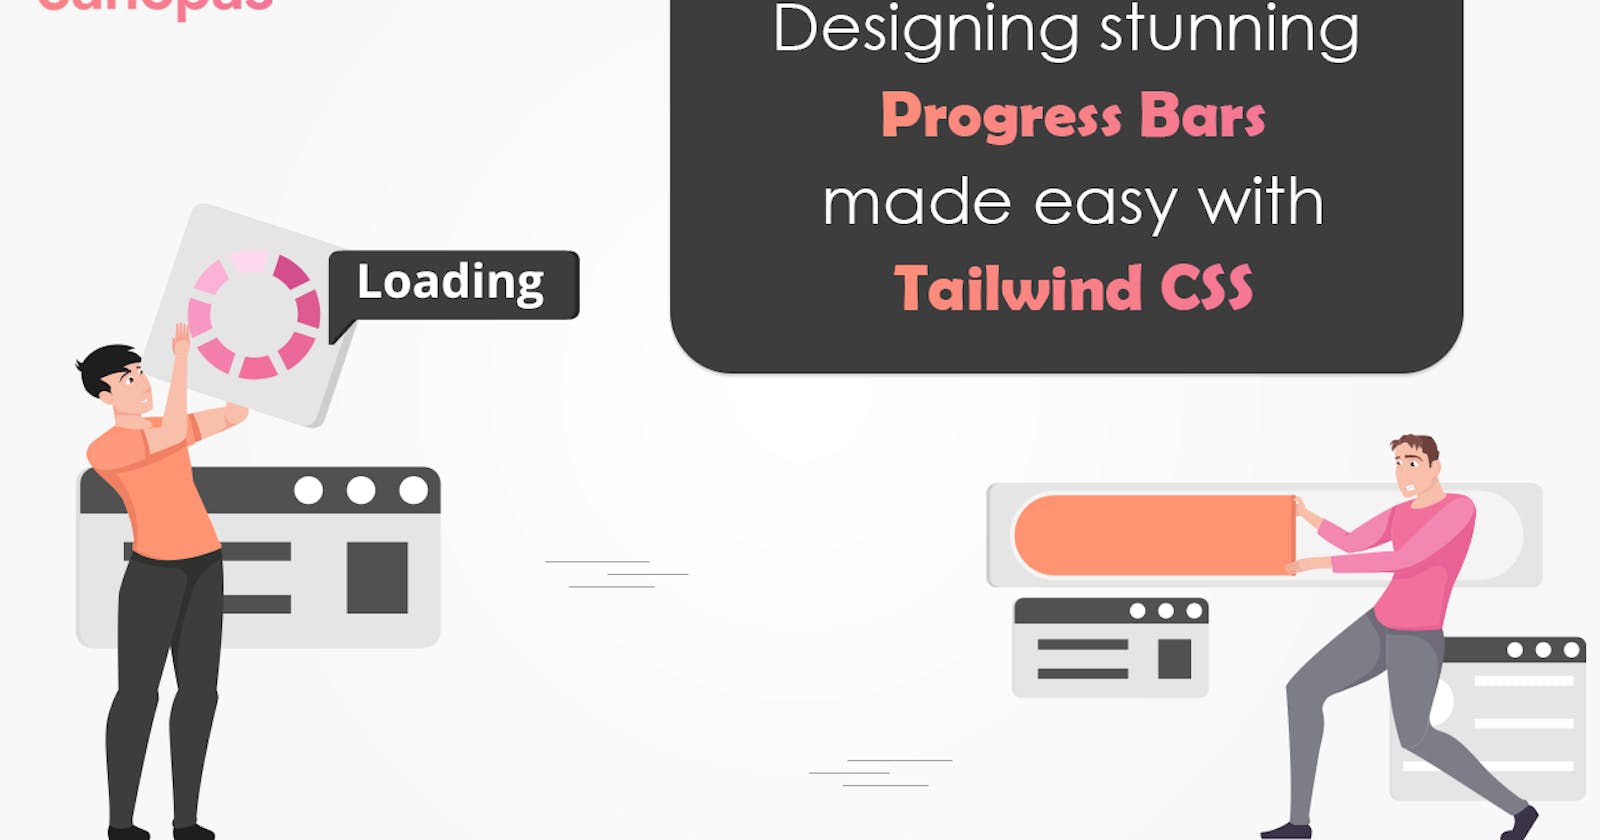 How to Design Attractive Progress Bars with Tailwind CSS?